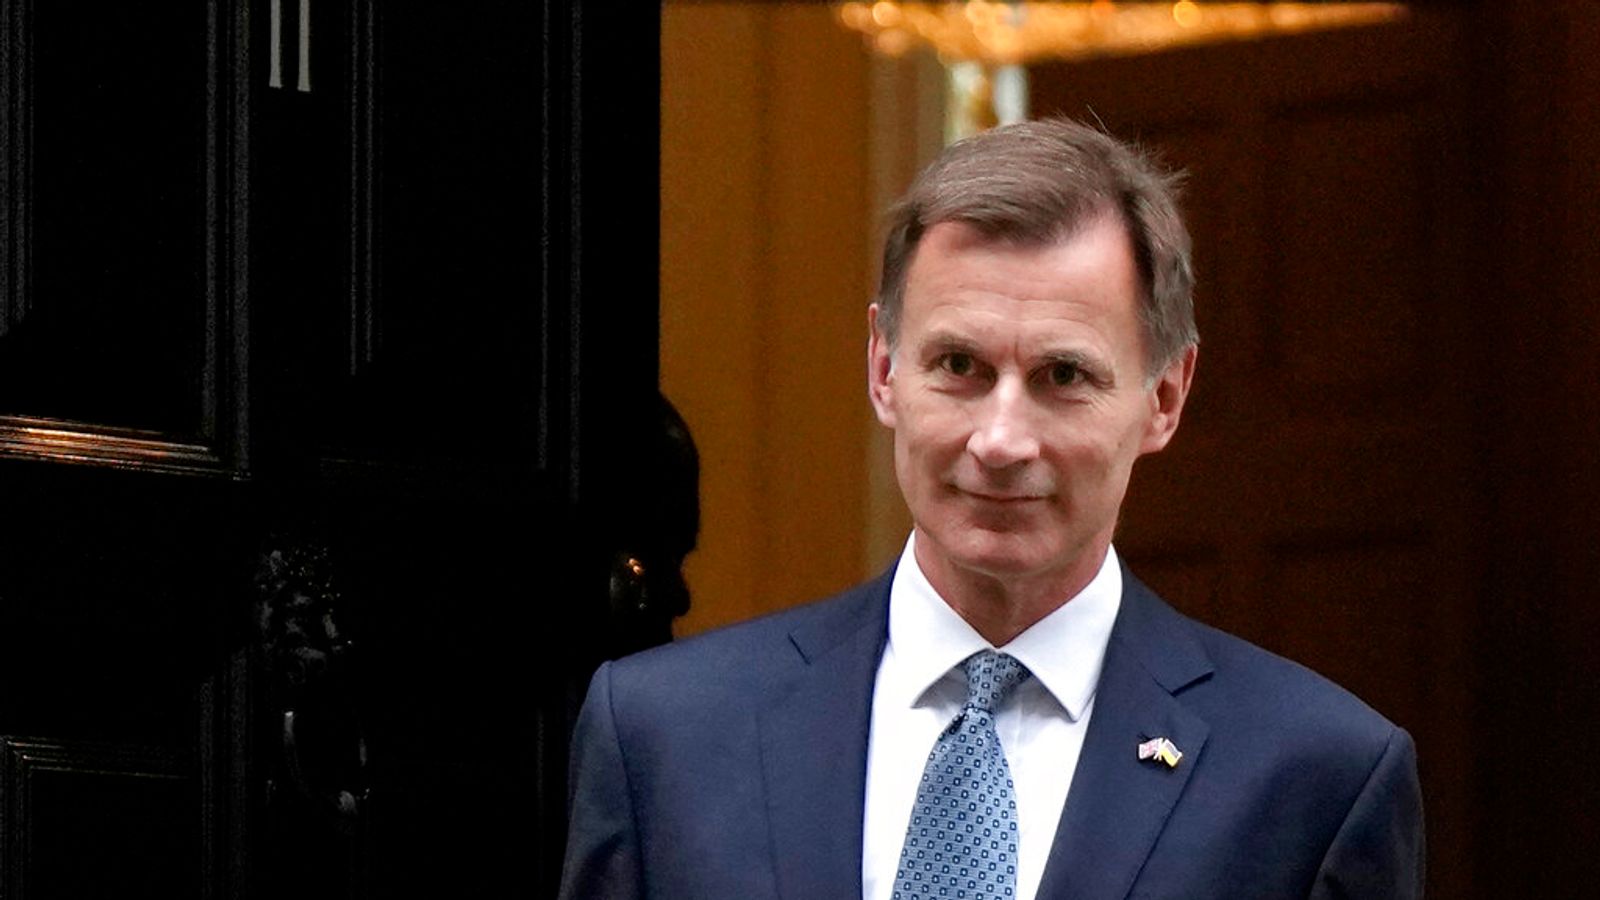 Chancellor Jeremy Hunt set to declare that dire predictions about UK's future are 'wrong'